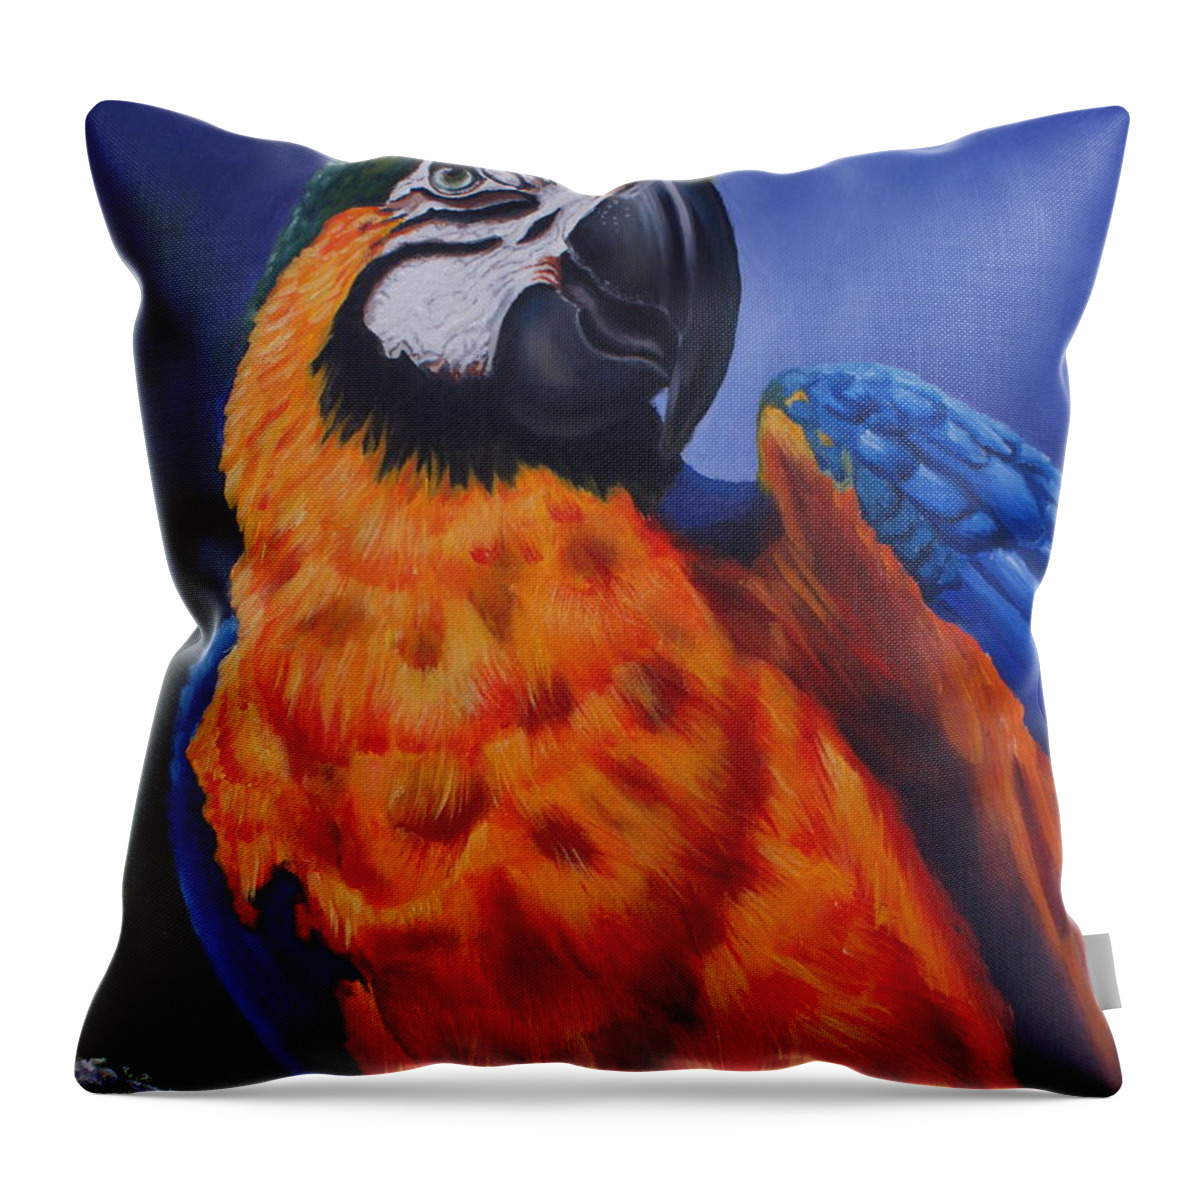 Bird Throw Pillow featuring the painting Macaw by Theresa Cangelosi